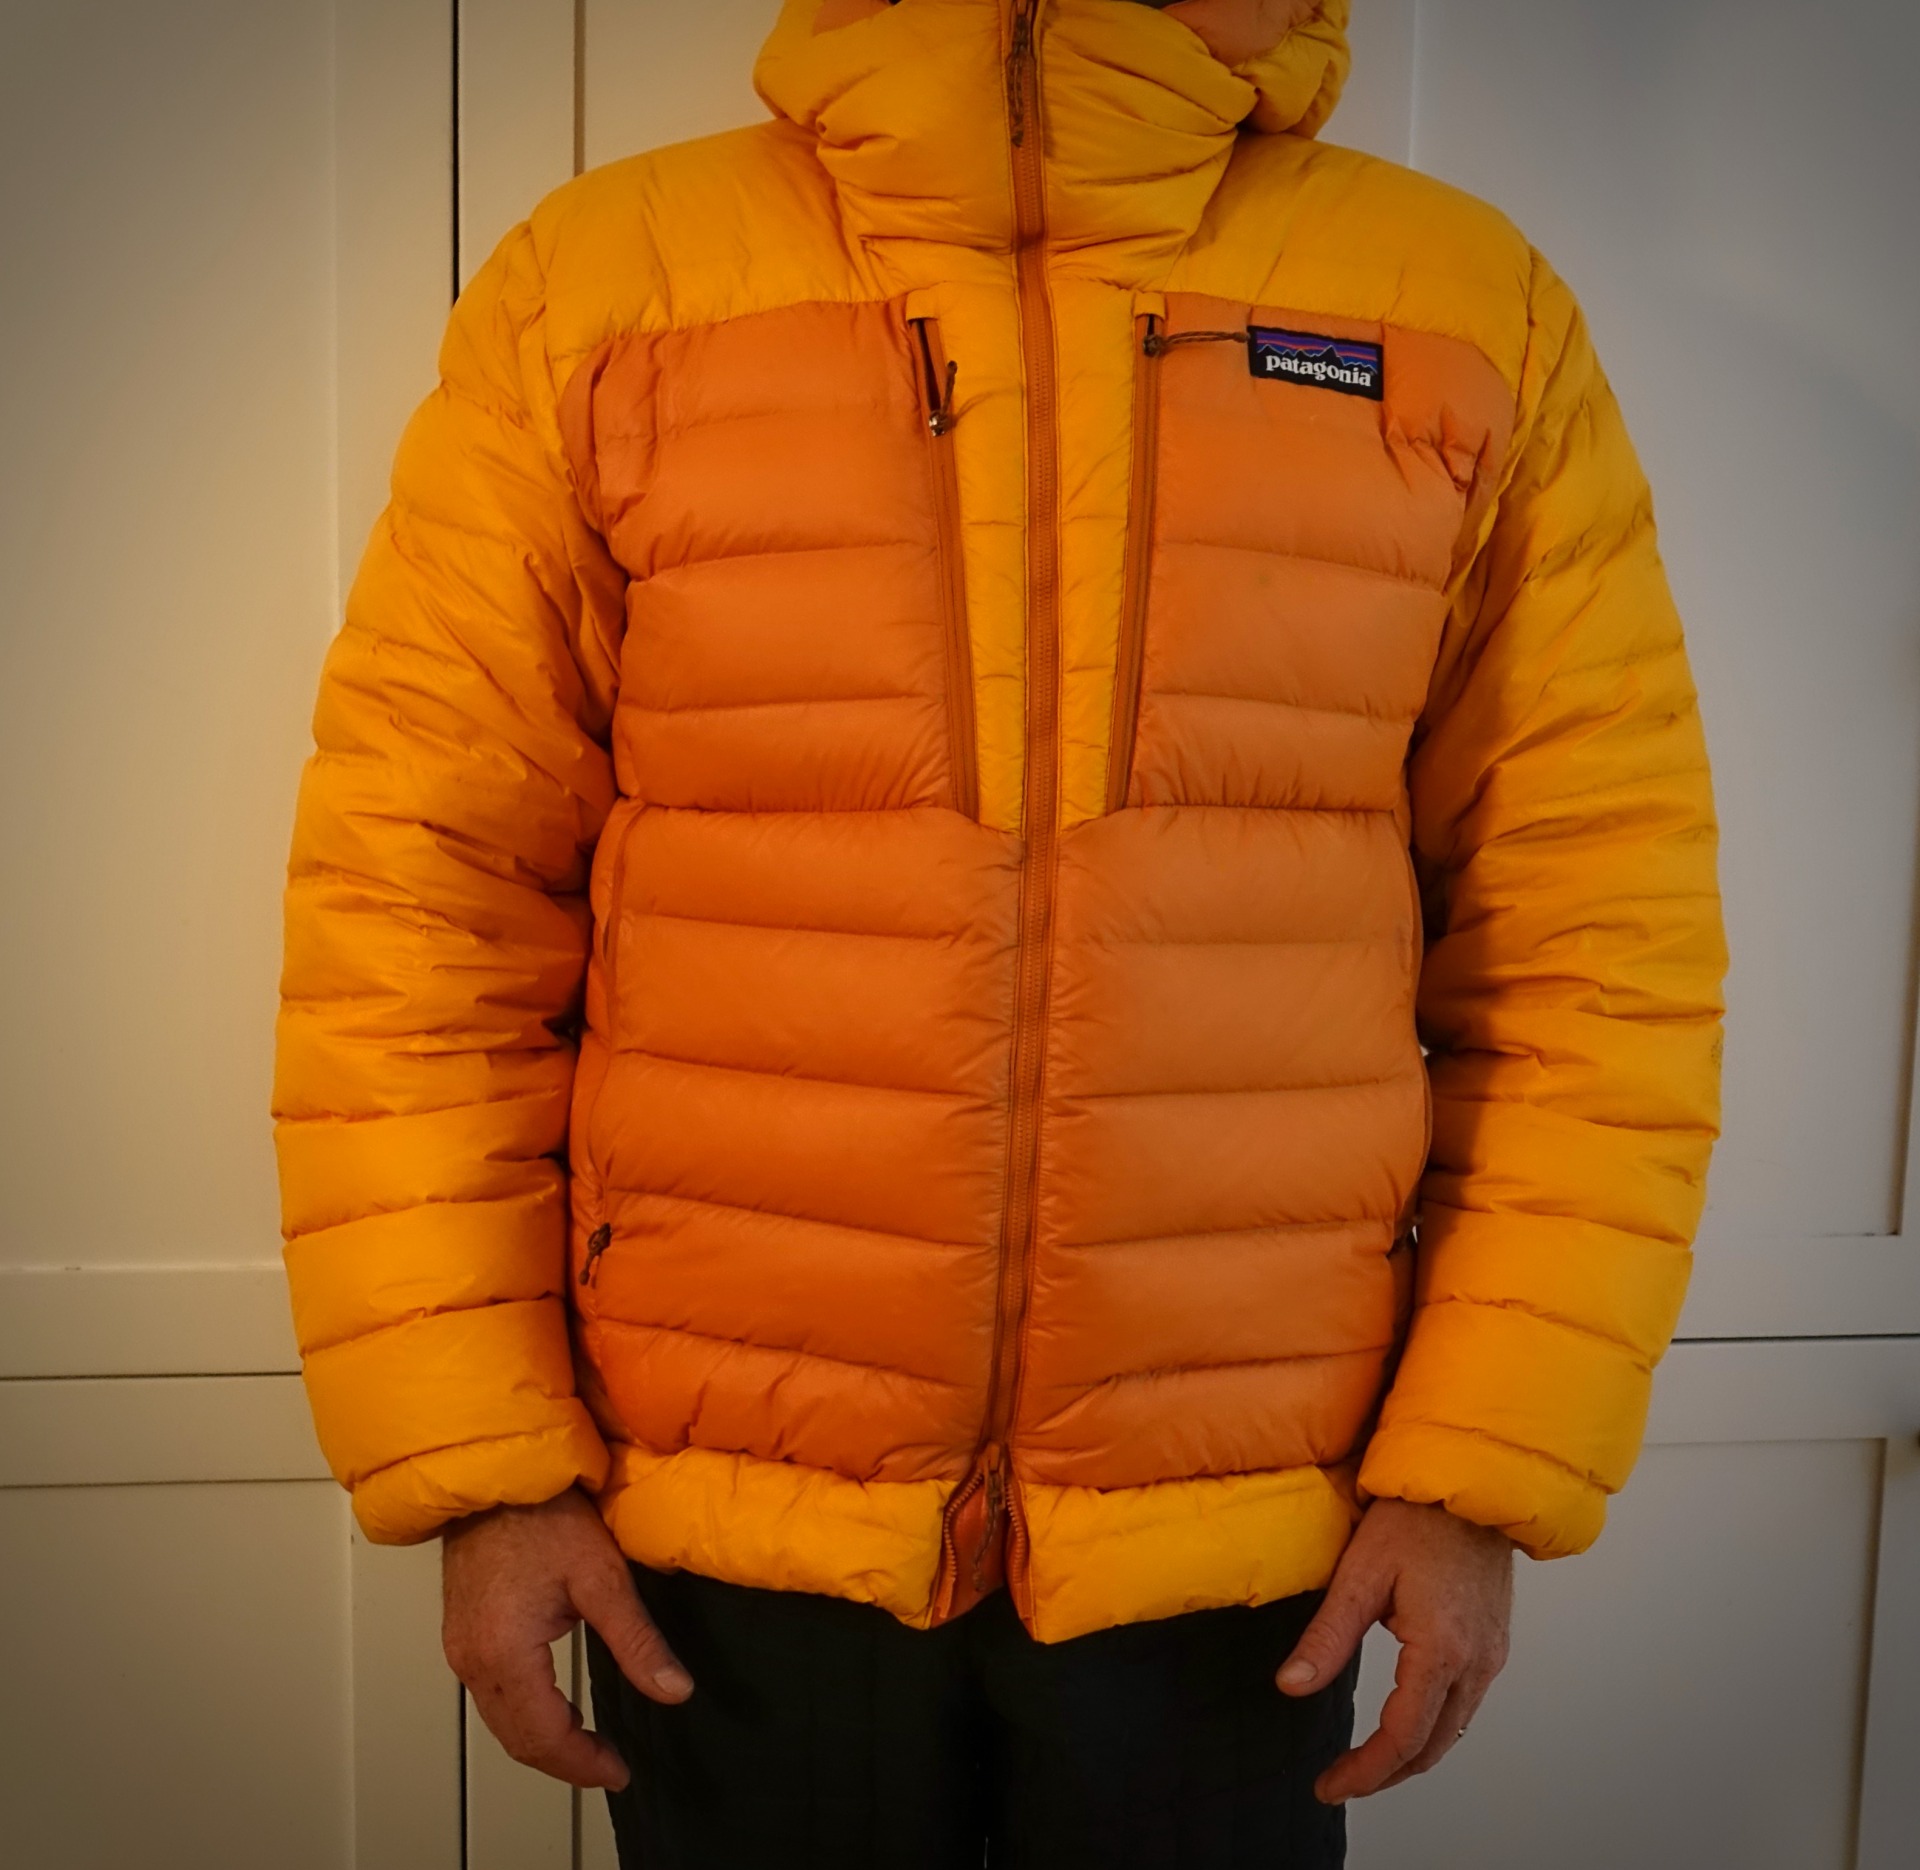 Patagonia's AlpLoft Down Parka: A Review - The Backcountry Ski Touring Blog